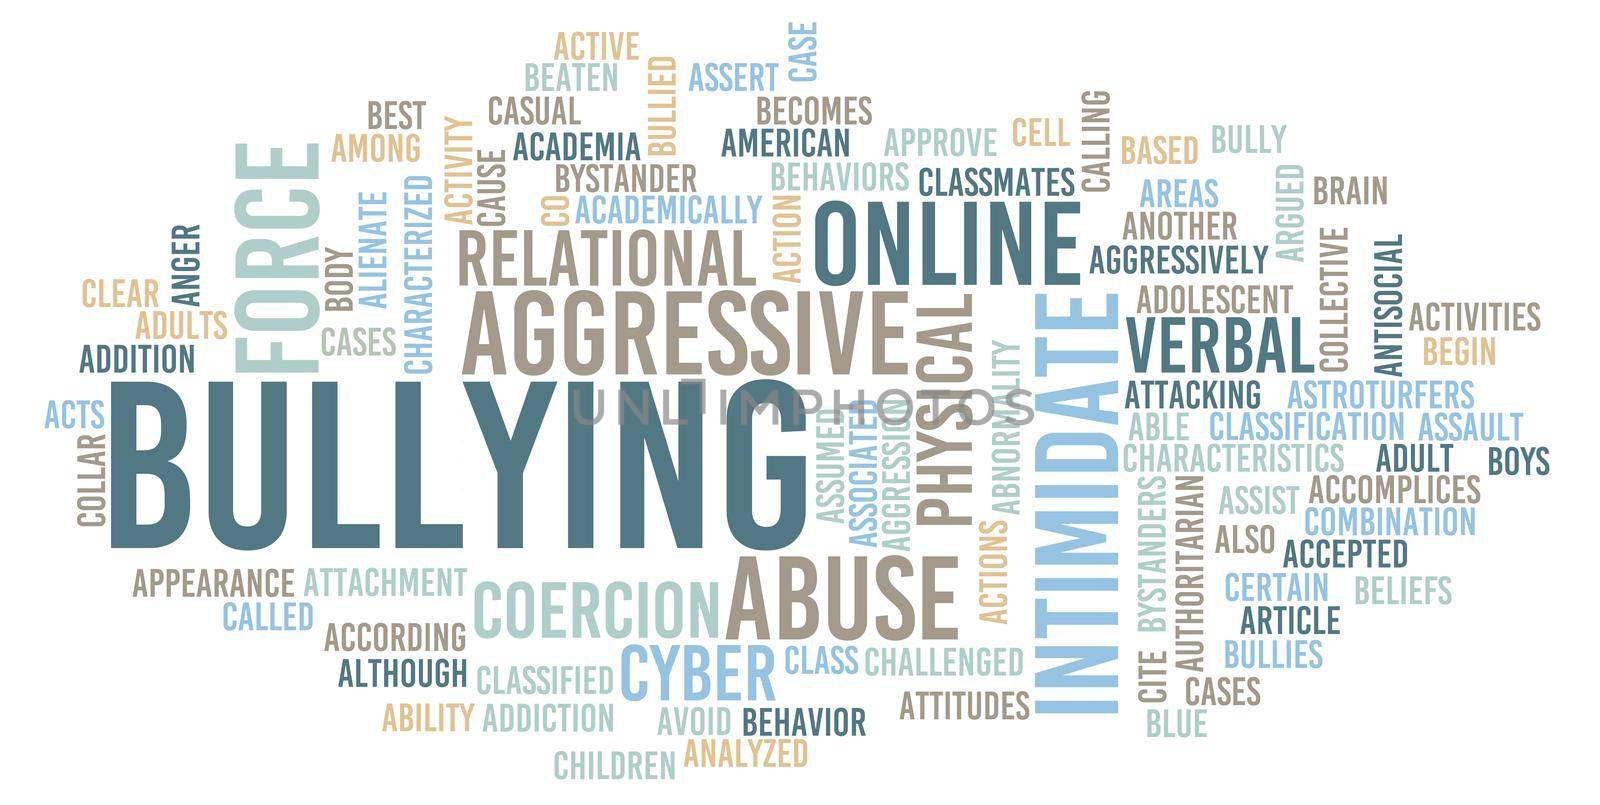 Bullying at School and Online as a Concept